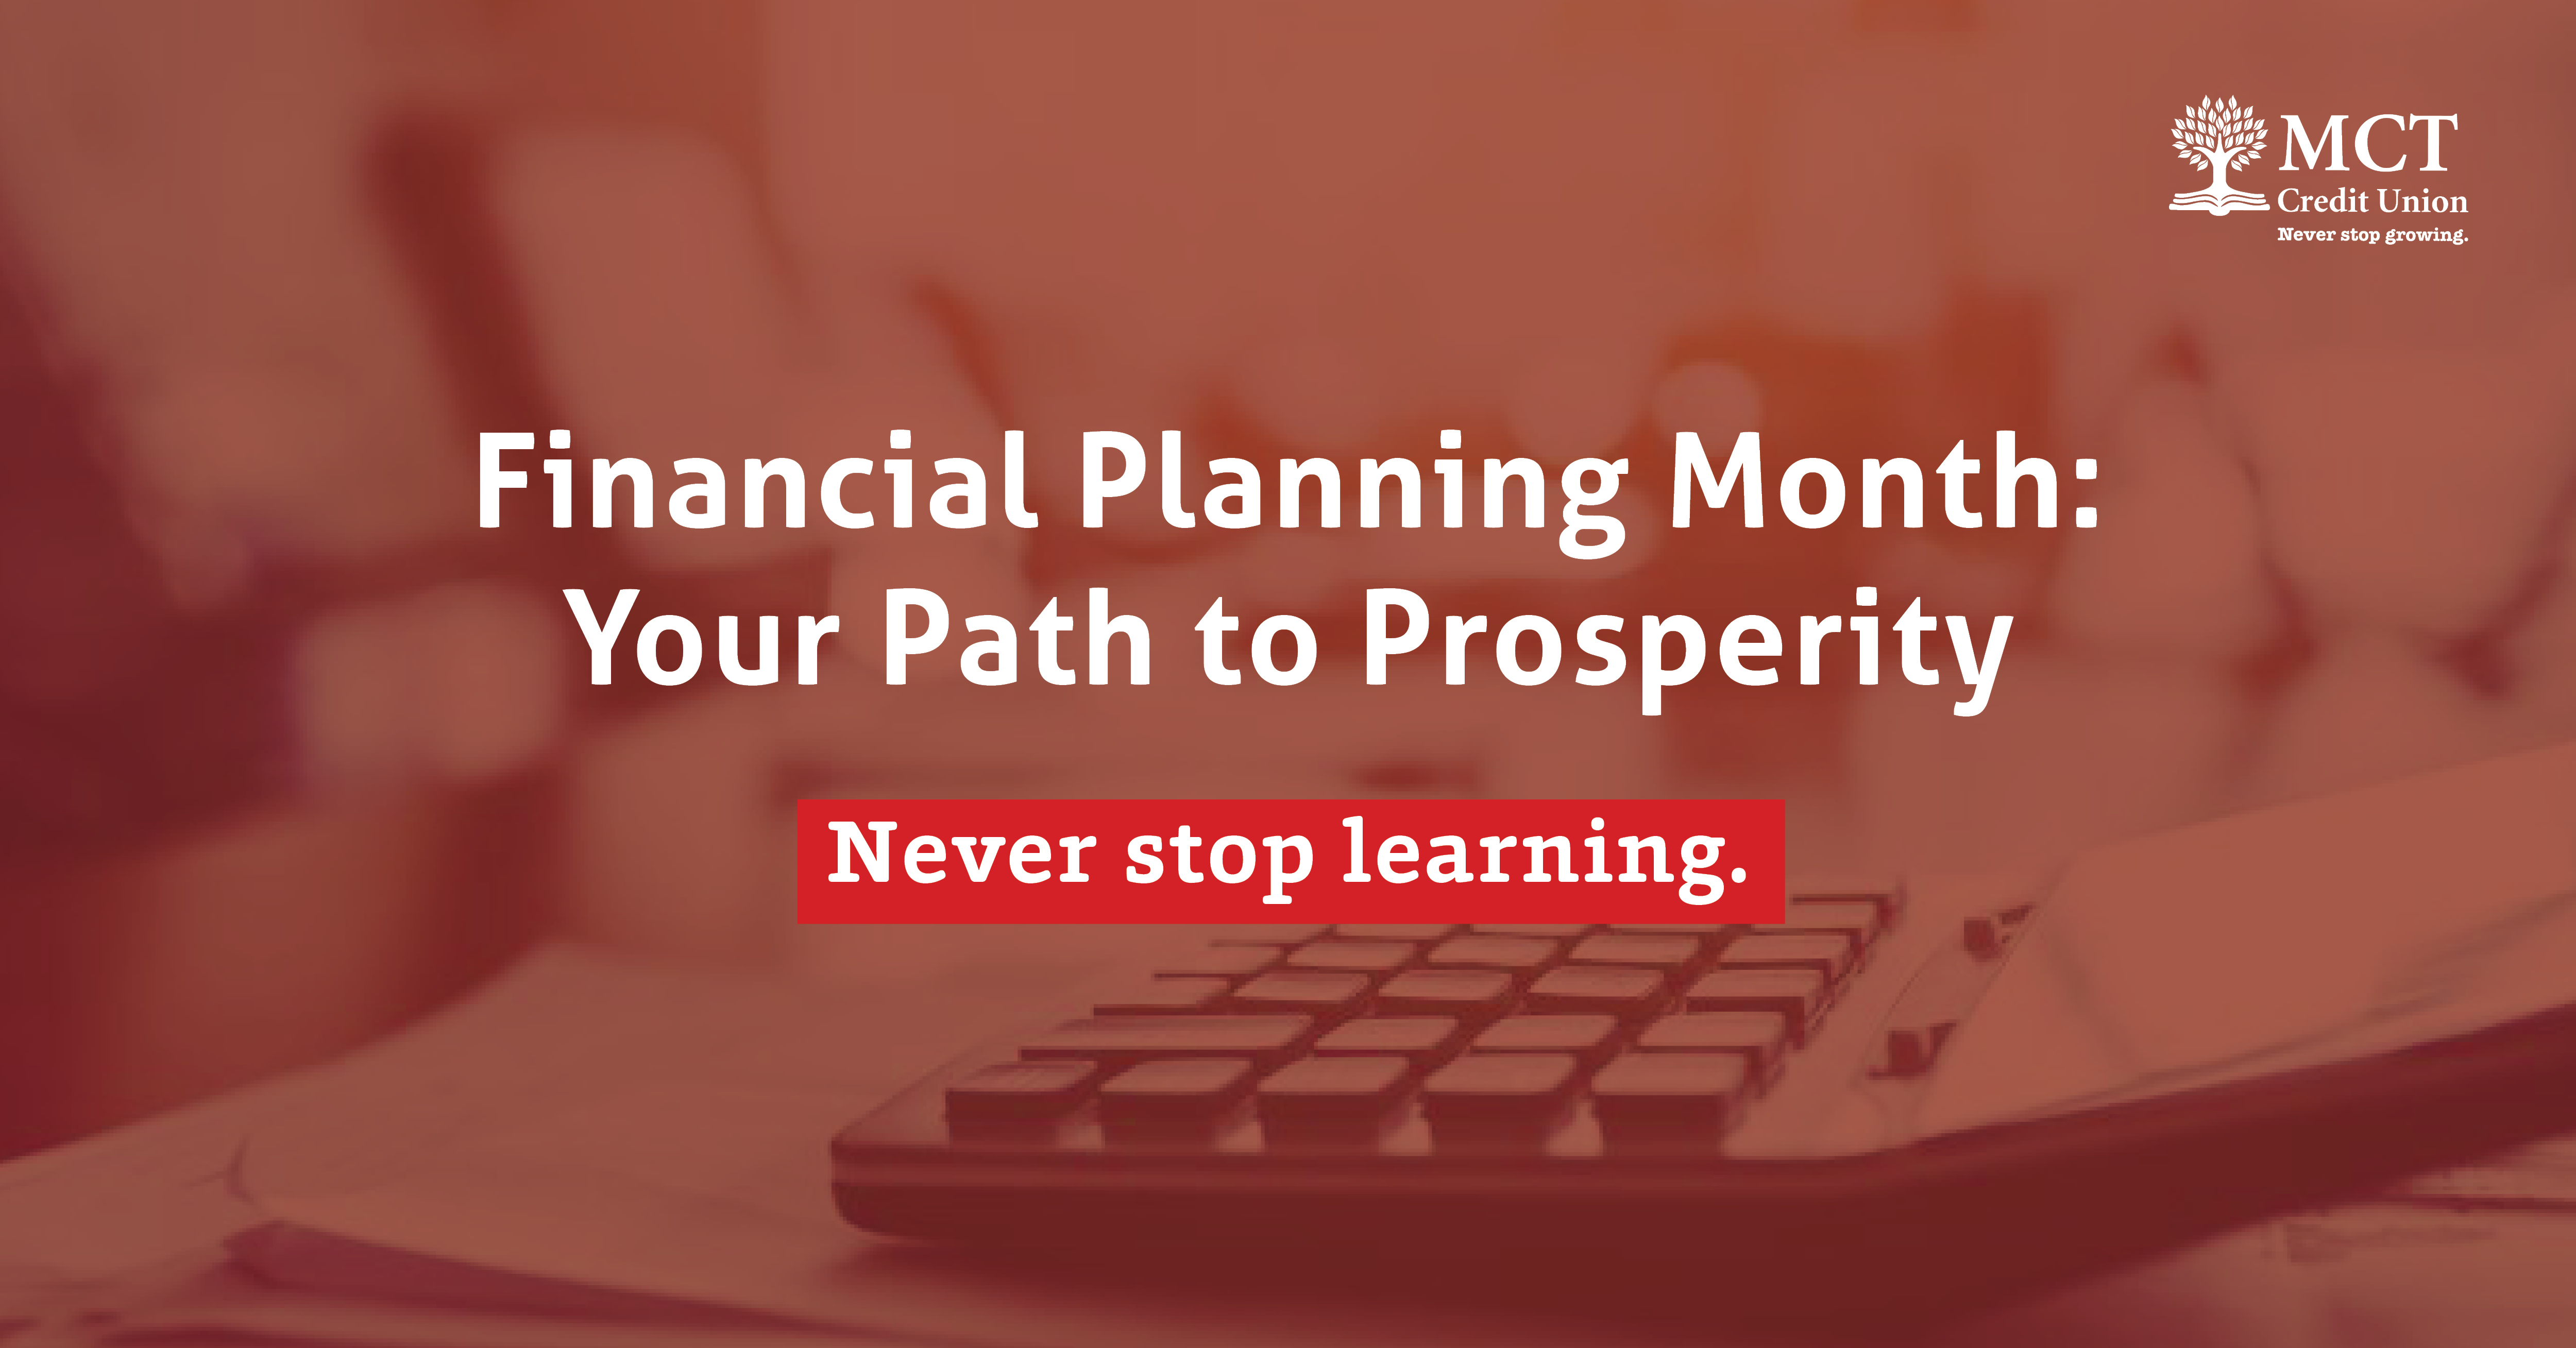 Financial Planning Month: Your Path to Prosperity